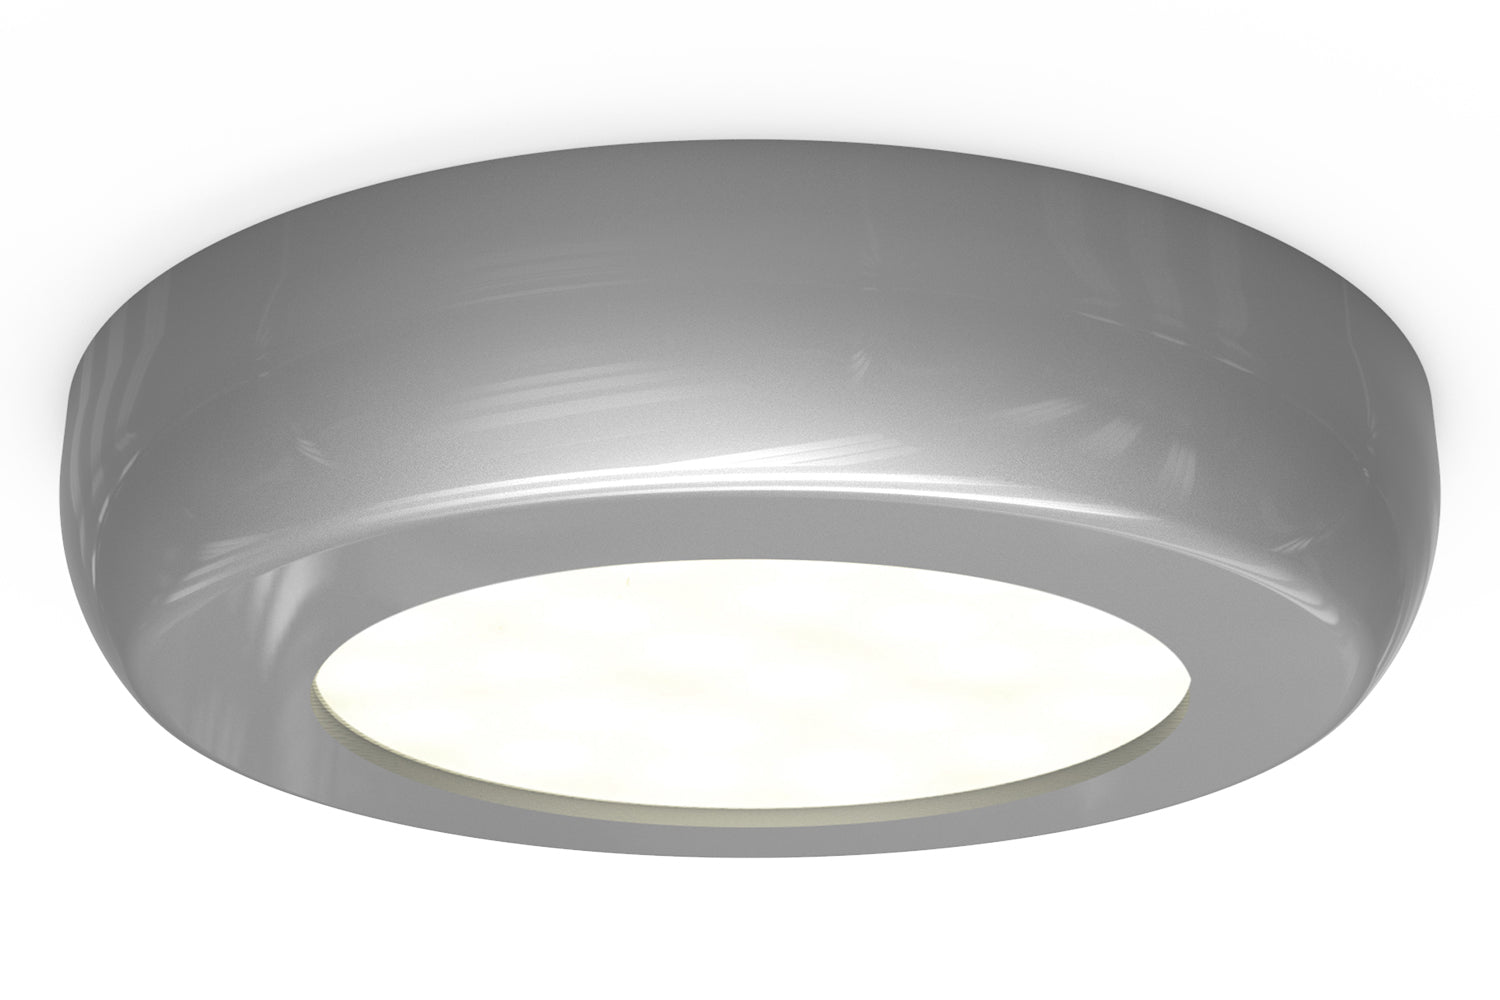 4lite Mains Powered Circle Cabinet LED Light - Silver - maplin.co.uk